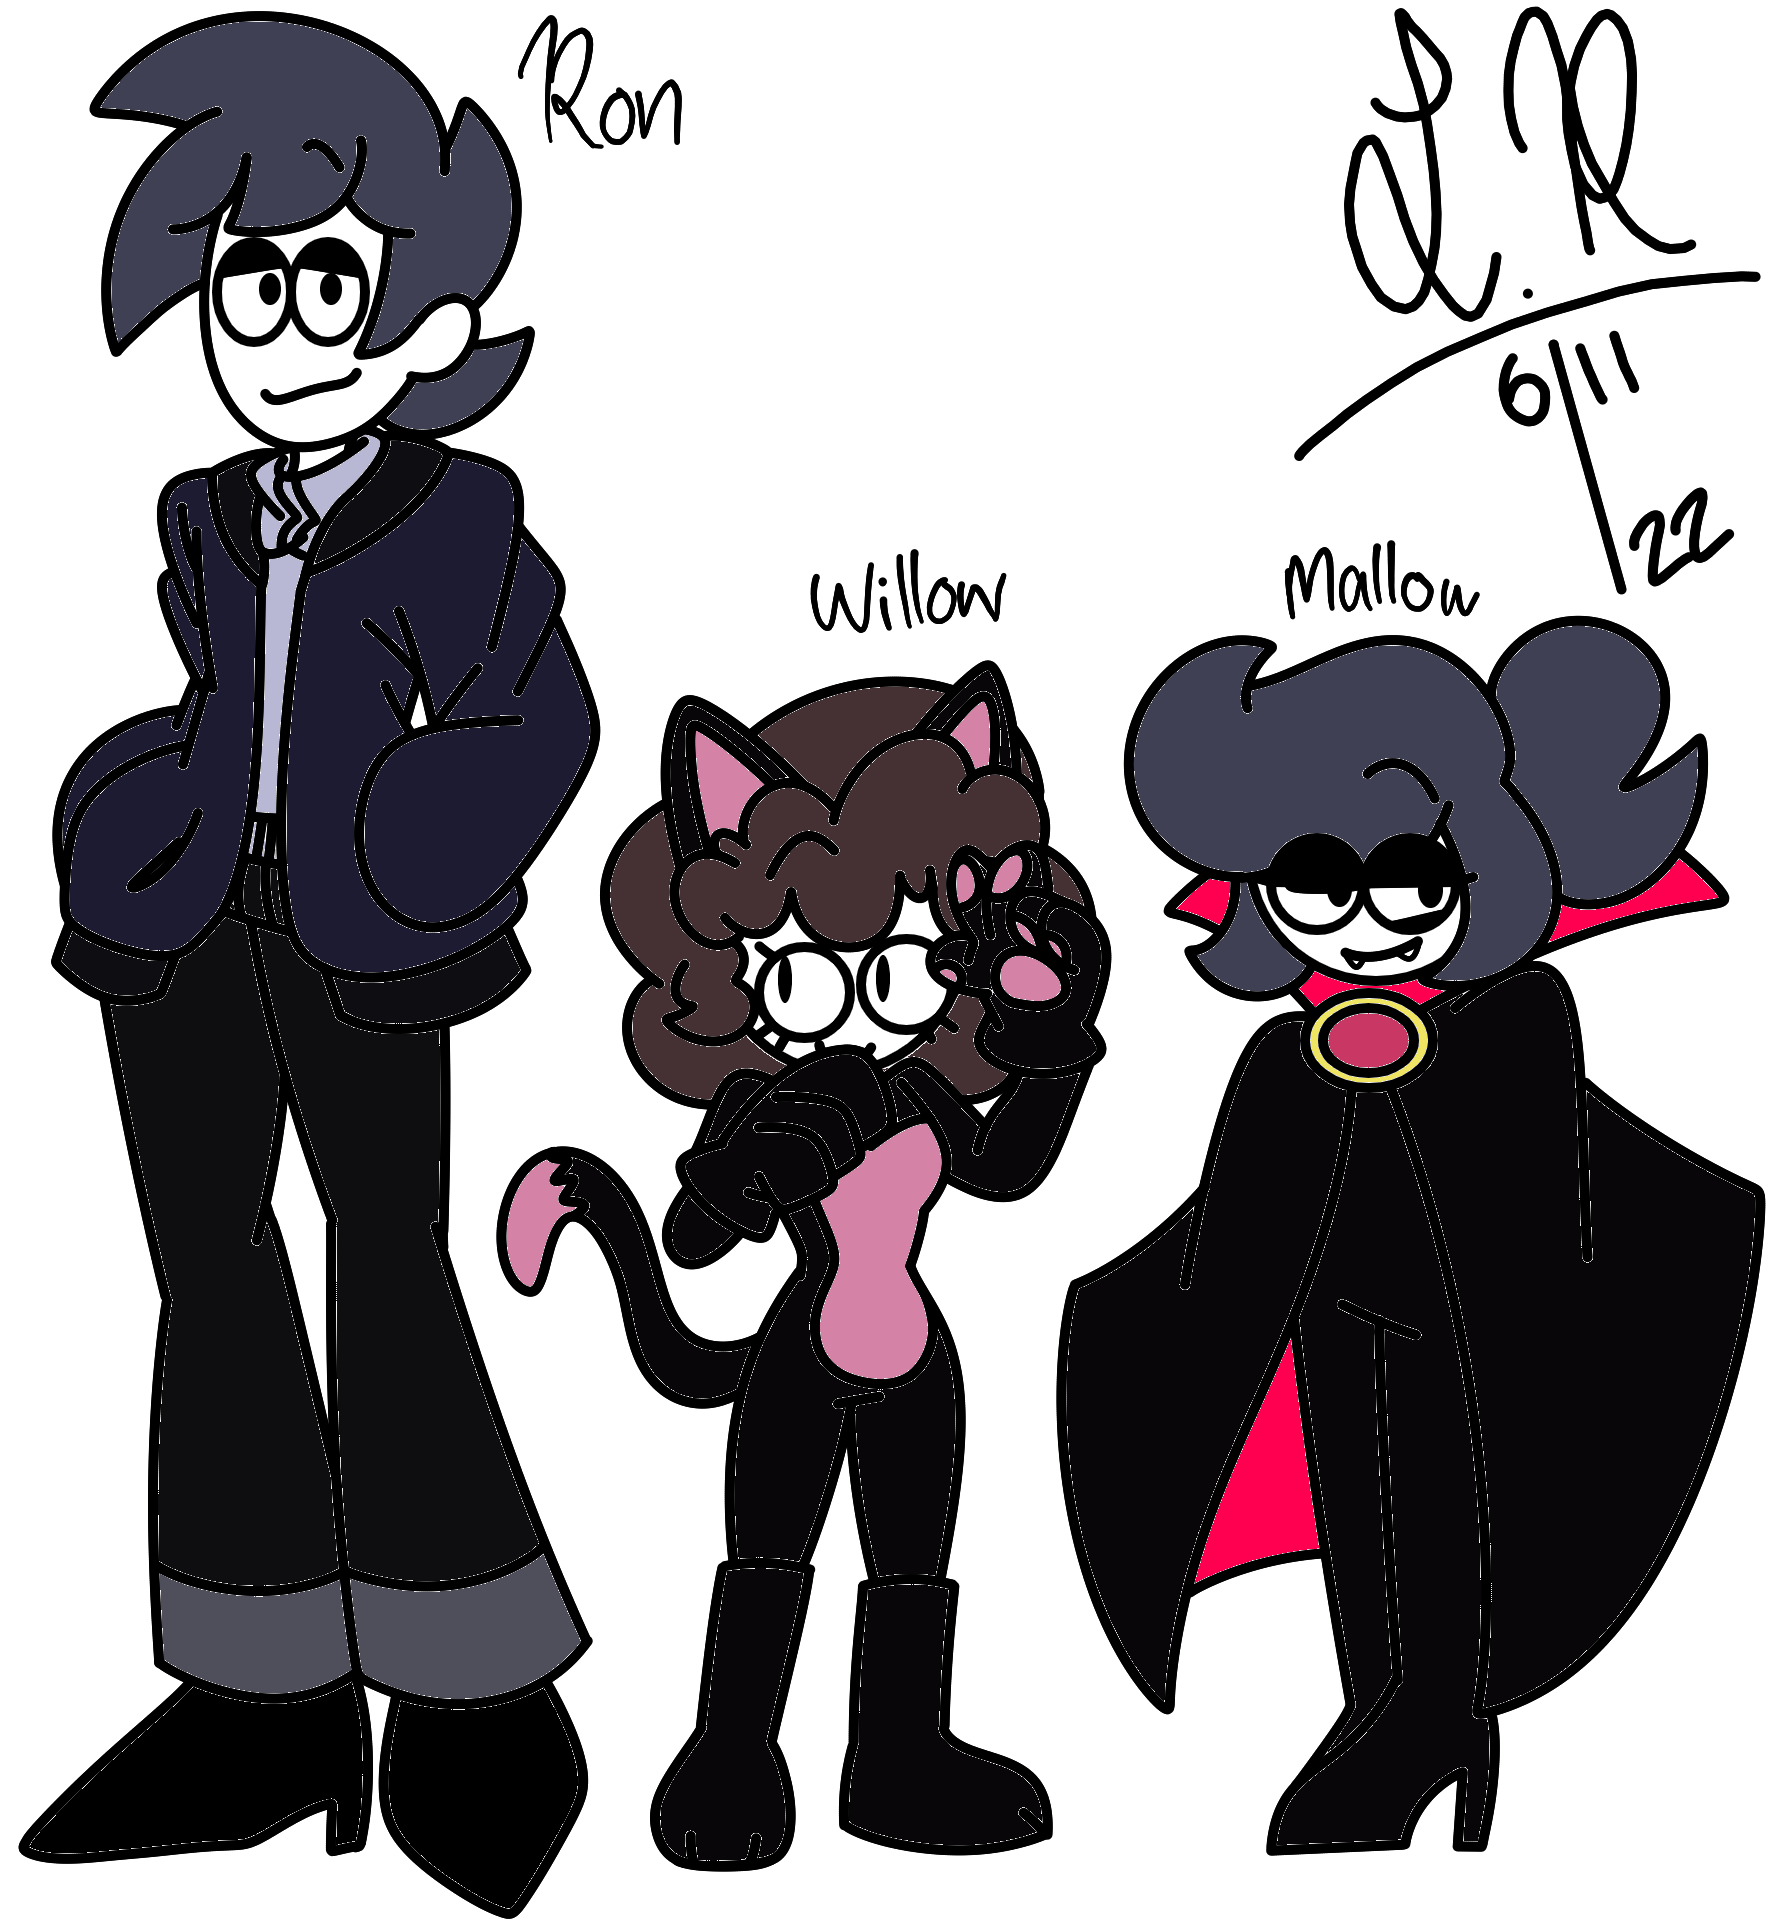 MY SPOOKY MONTH AU ROY'S FAMILY UPDATED by IMABEAR1983 on DeviantArt